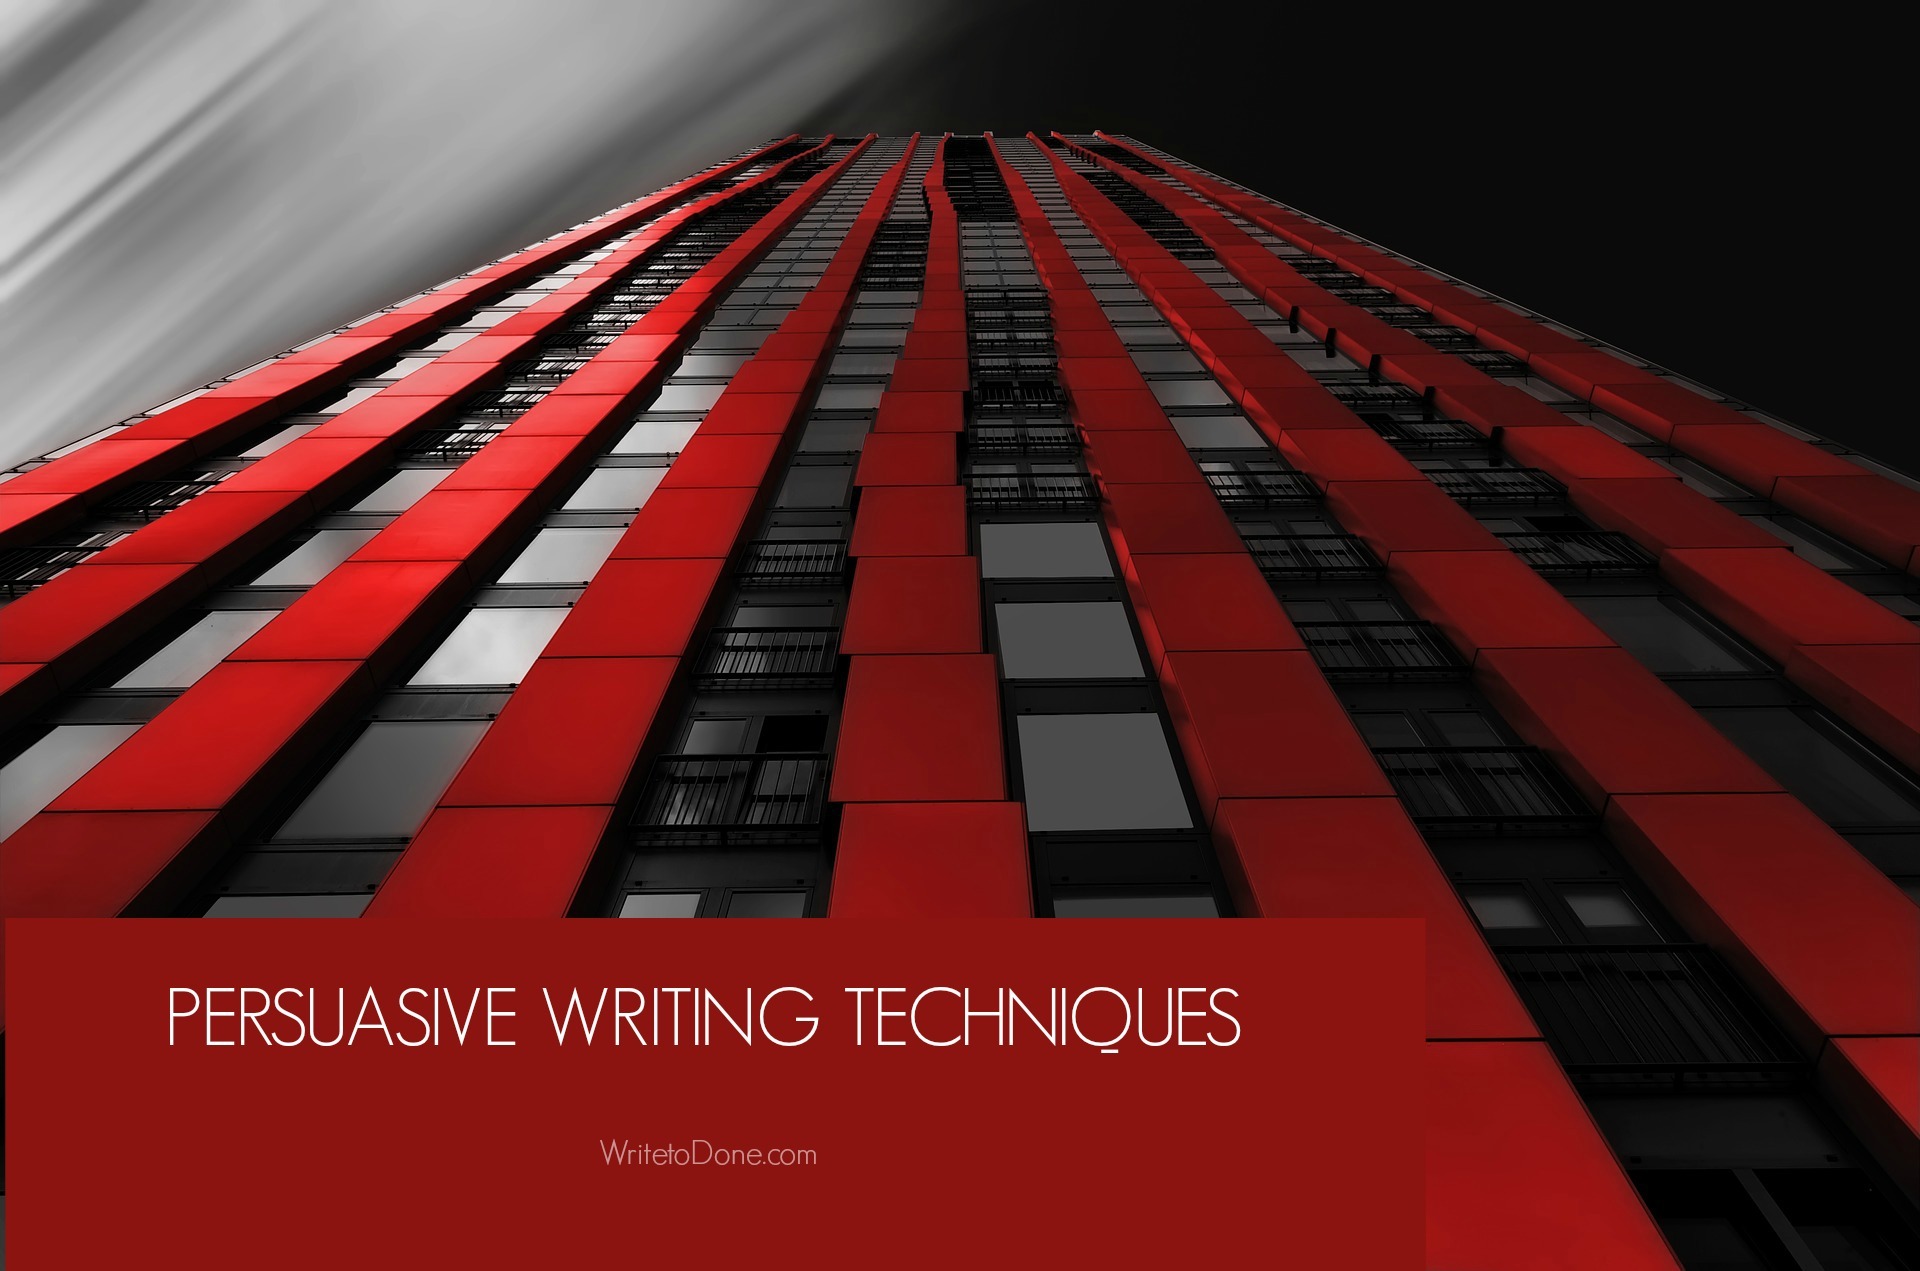 Persuasive Writing Techniques: The Key to a Stellar Writing Career